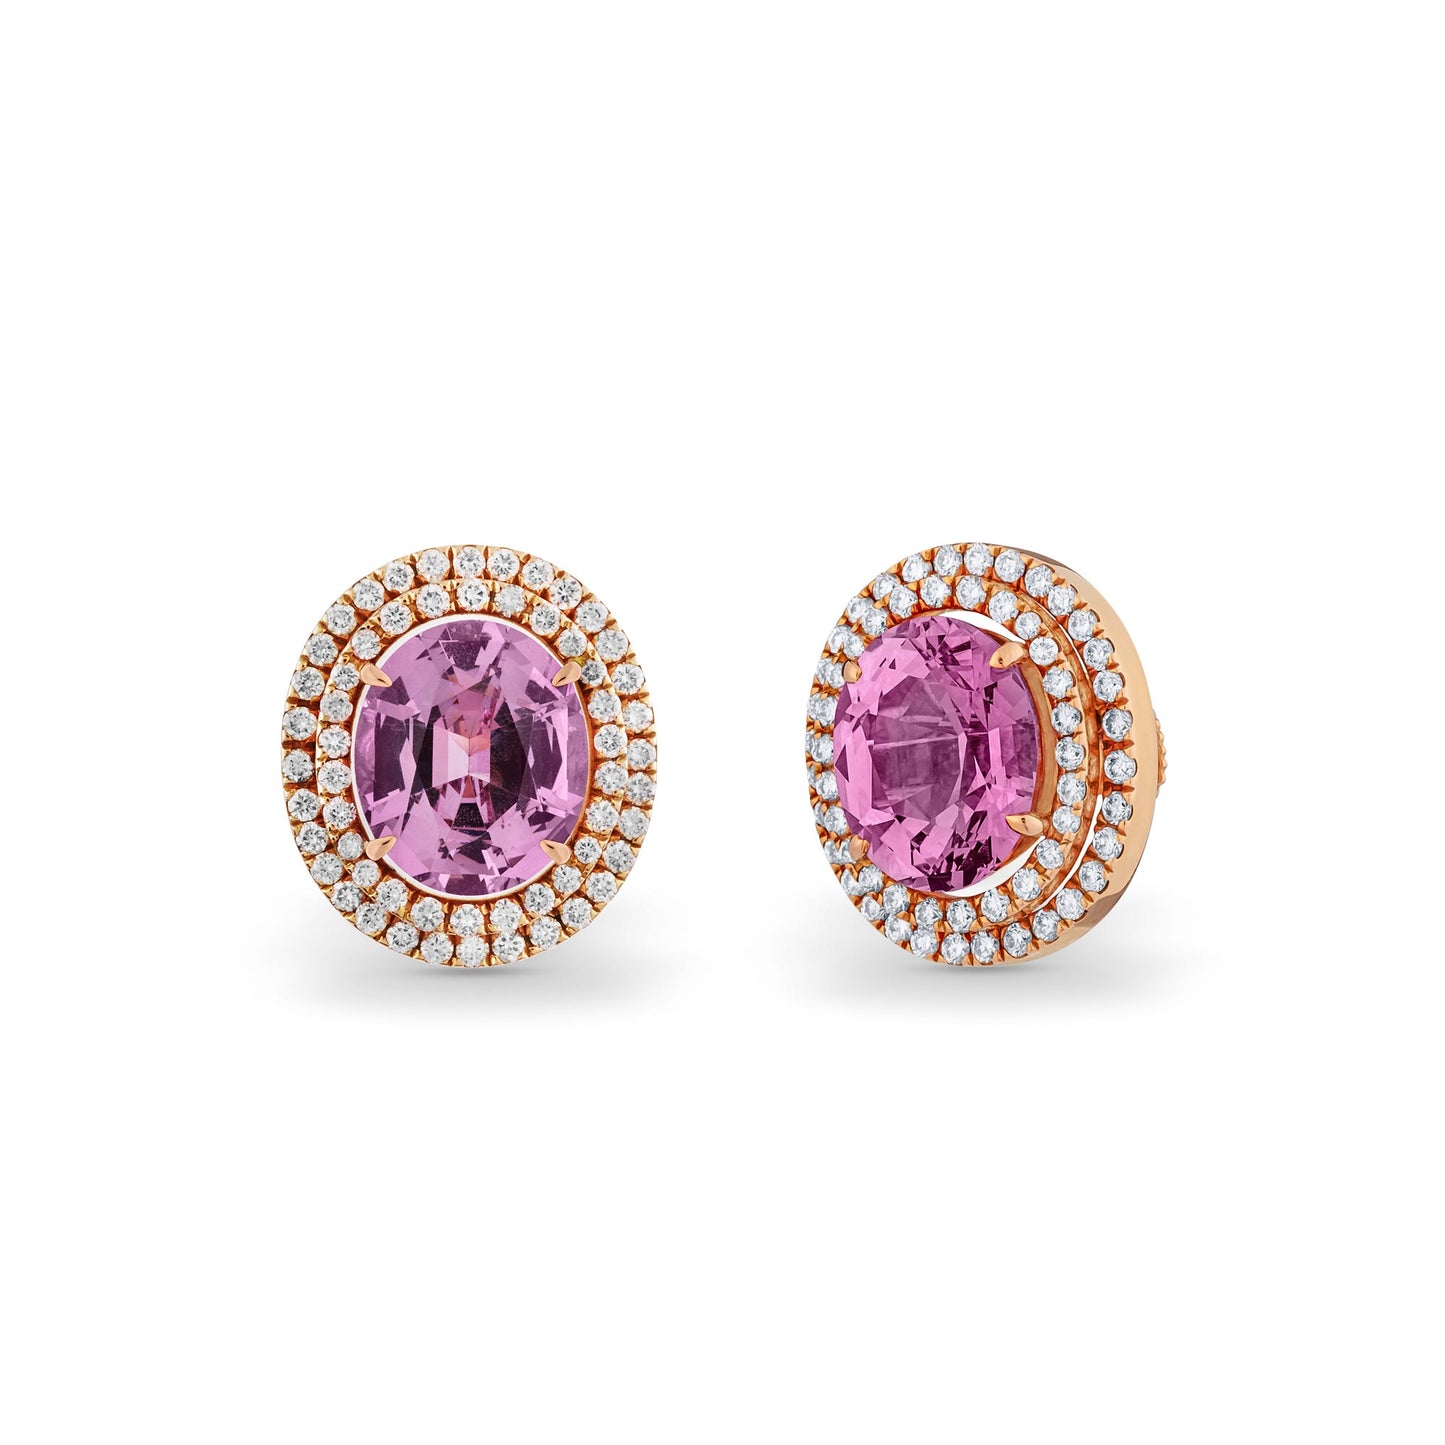 Earrings in 18ct Rose Gold with Oval Pastel Pink Spinel and Diamonds